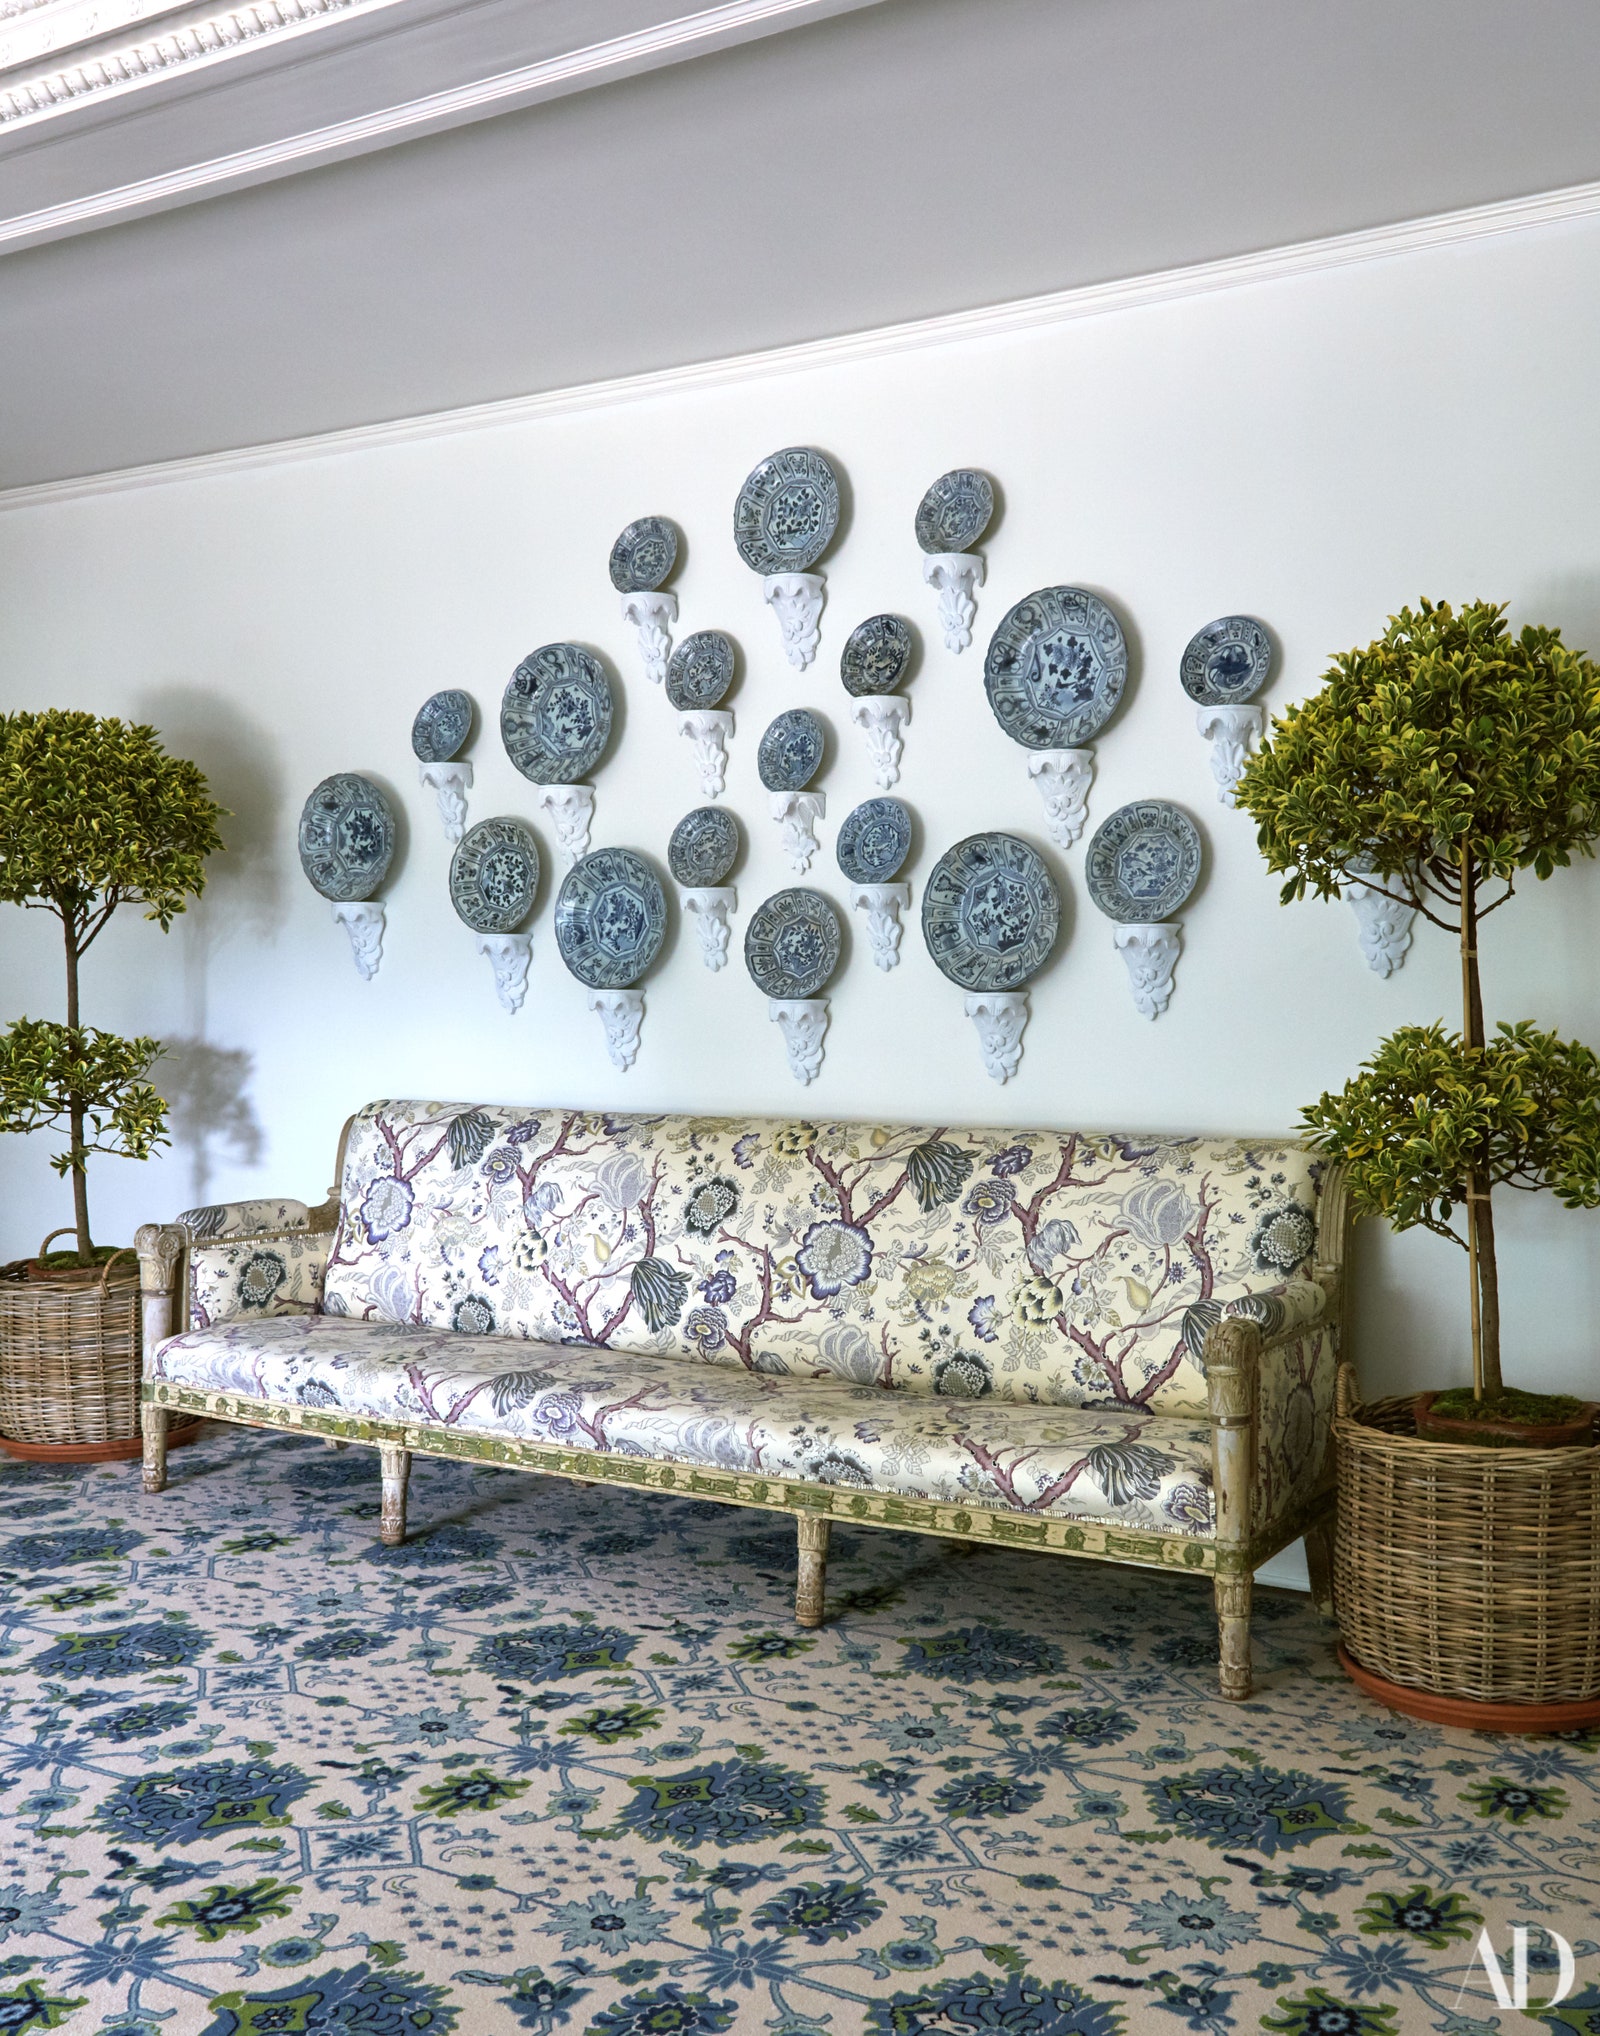 Décor Inspiration | At Home With: Tory Burch, Southampton